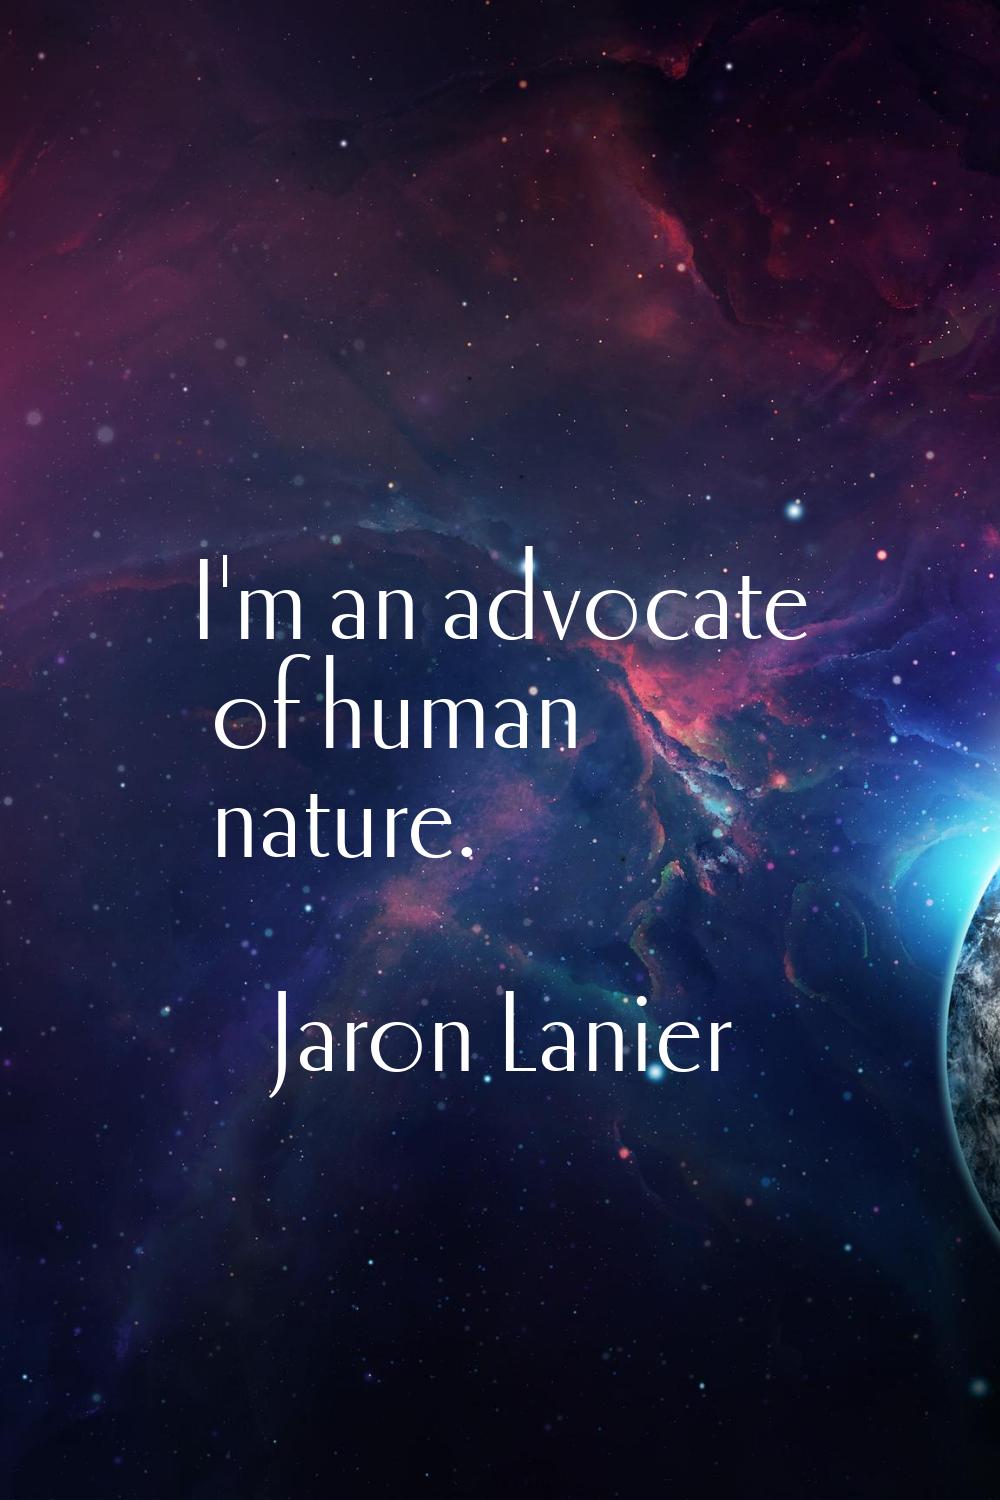 I'm an advocate of human nature.